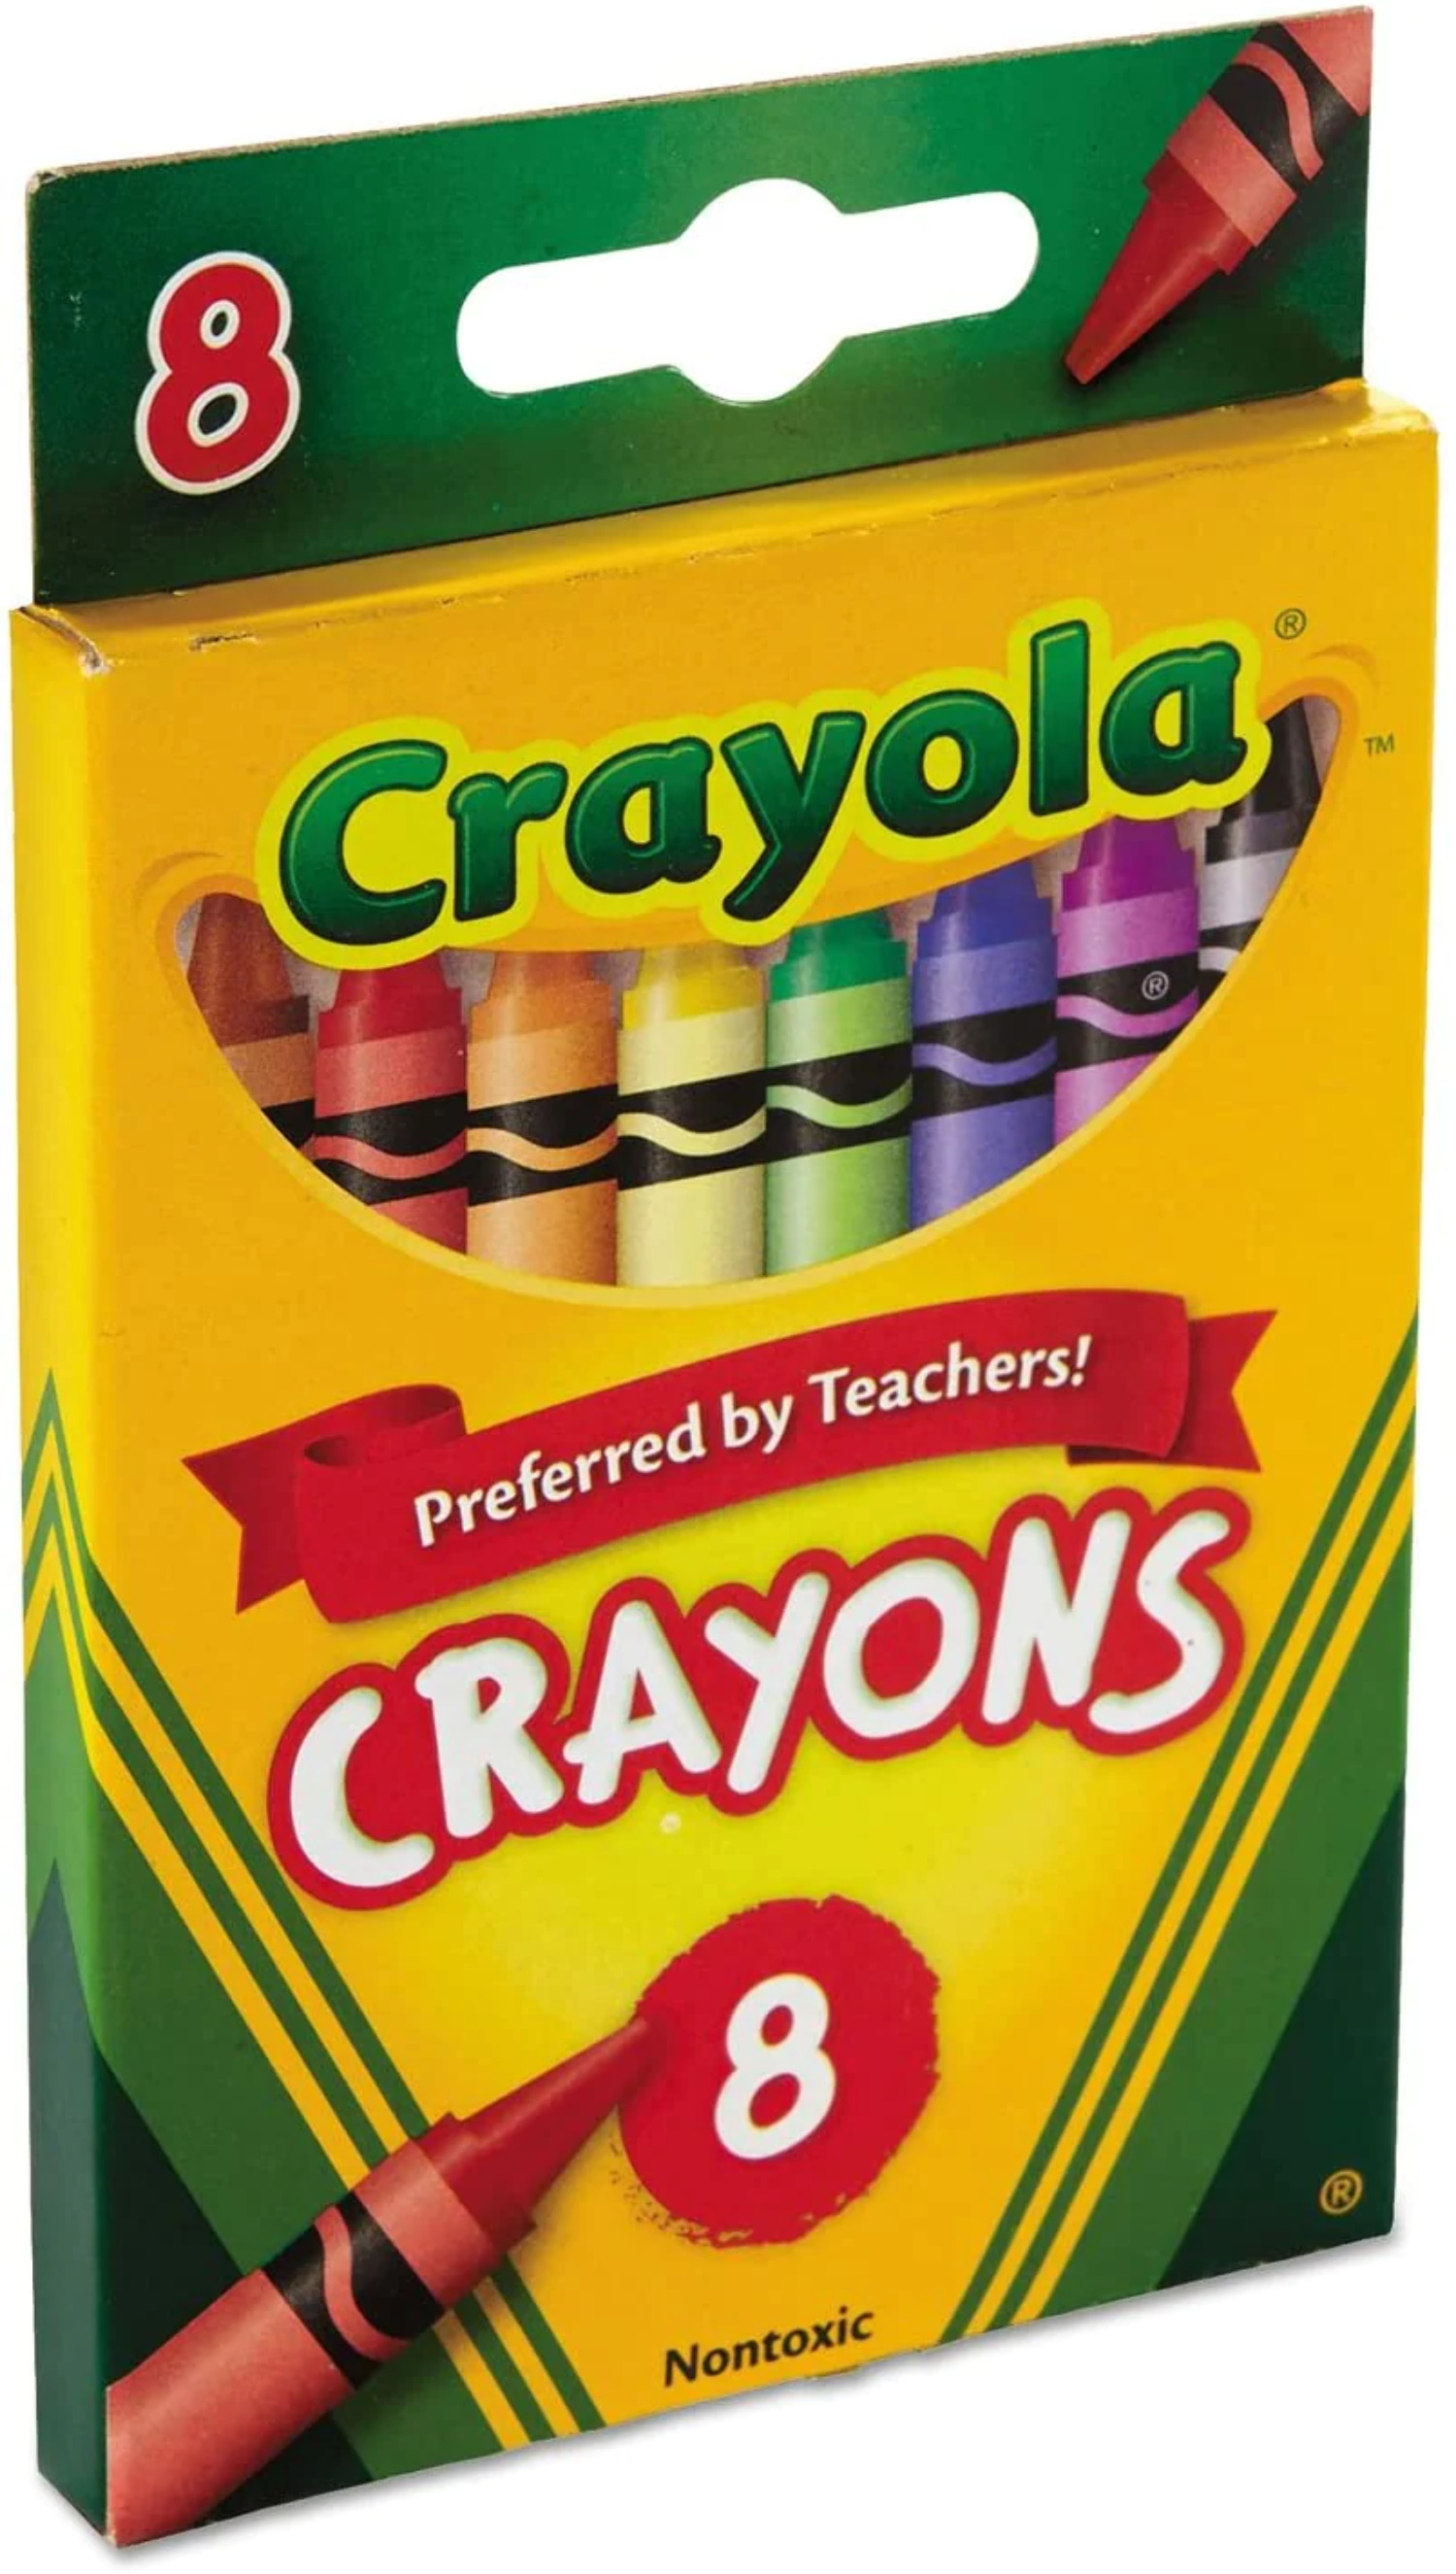 (4 pack) Crayola Classic Crayons, Back to School Supplies for Kids, 8 Ct, Art Supplies - image 4 of 7